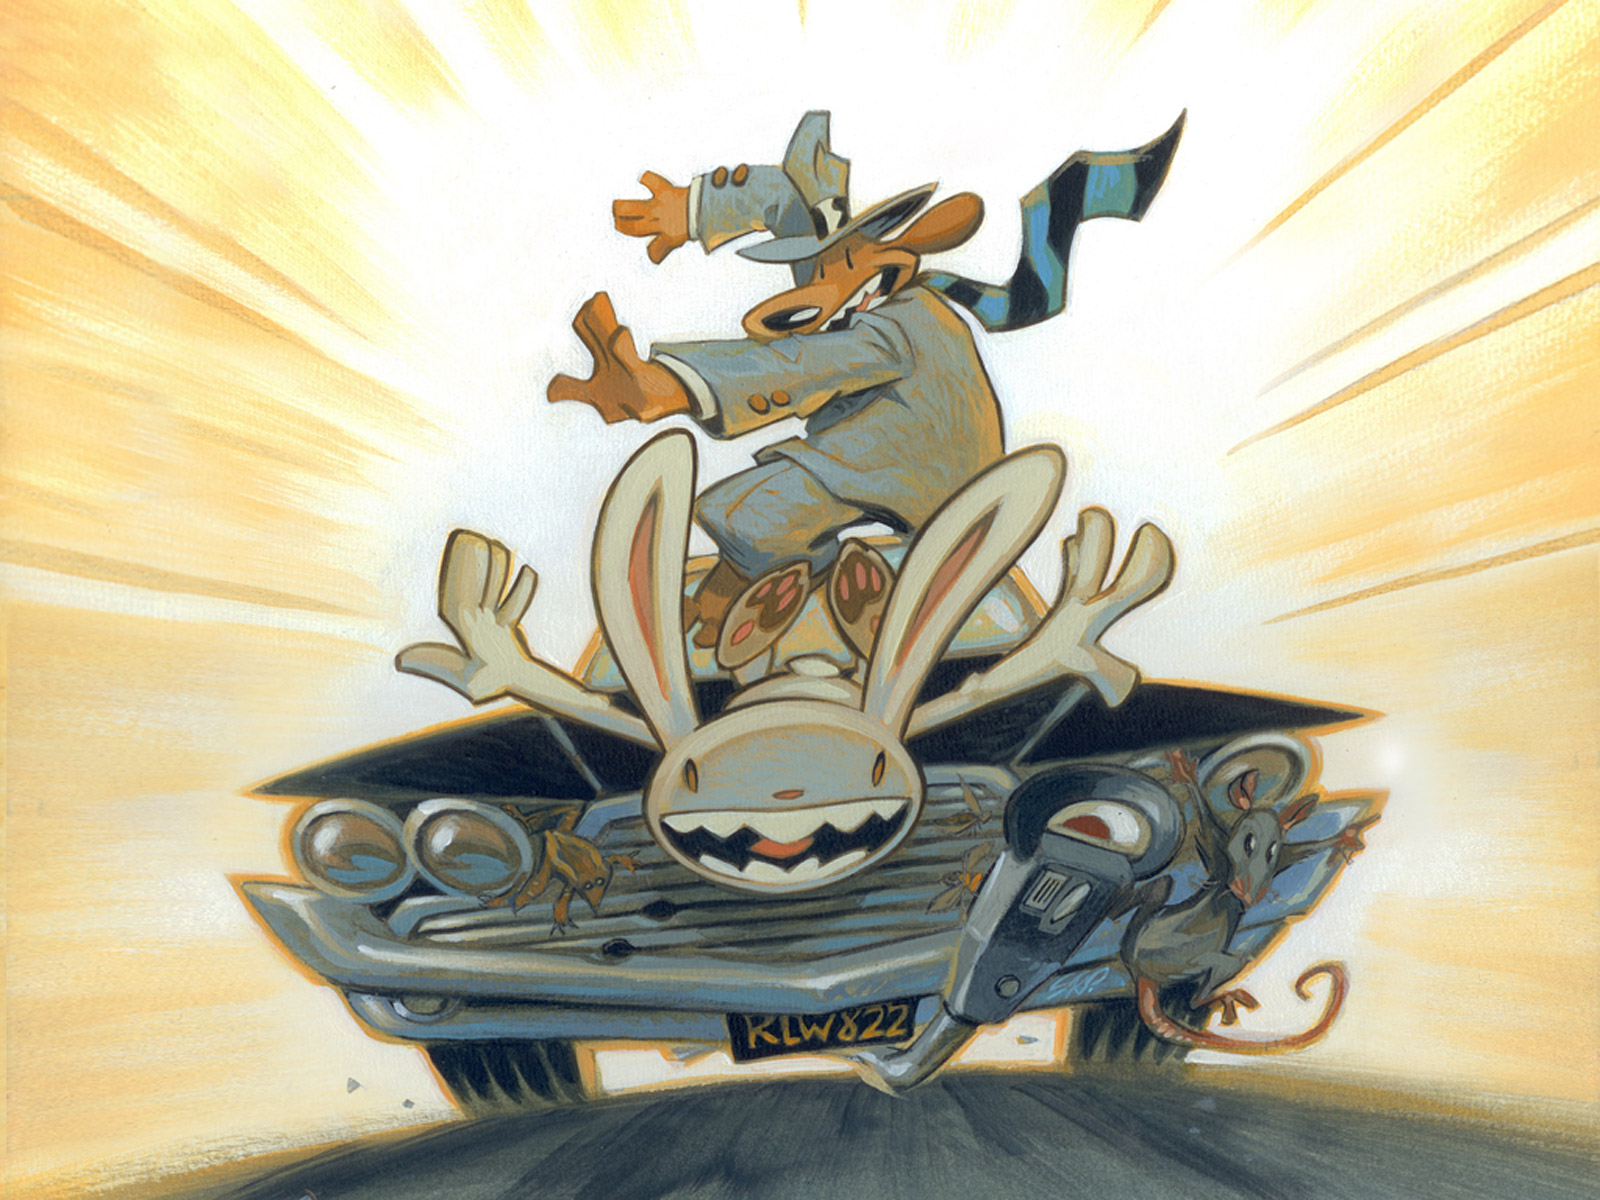 Sam and Max surfing on their car, having run over a parking meter. A scared rat is stuck to their car's grill